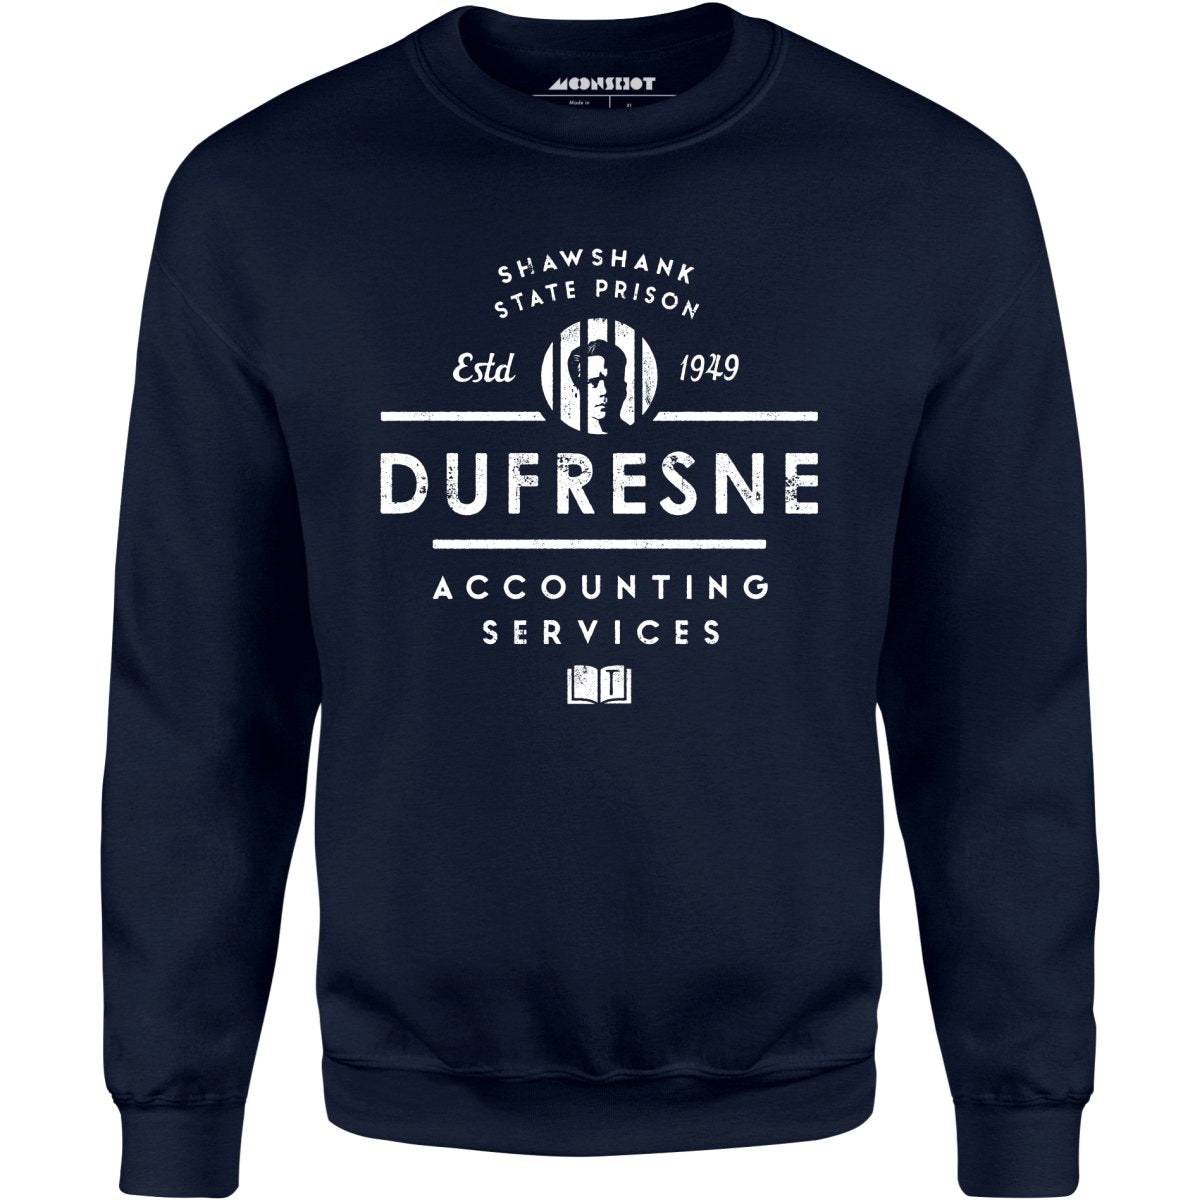 Dufresne Accounting Services - Unisex Sweatshirt